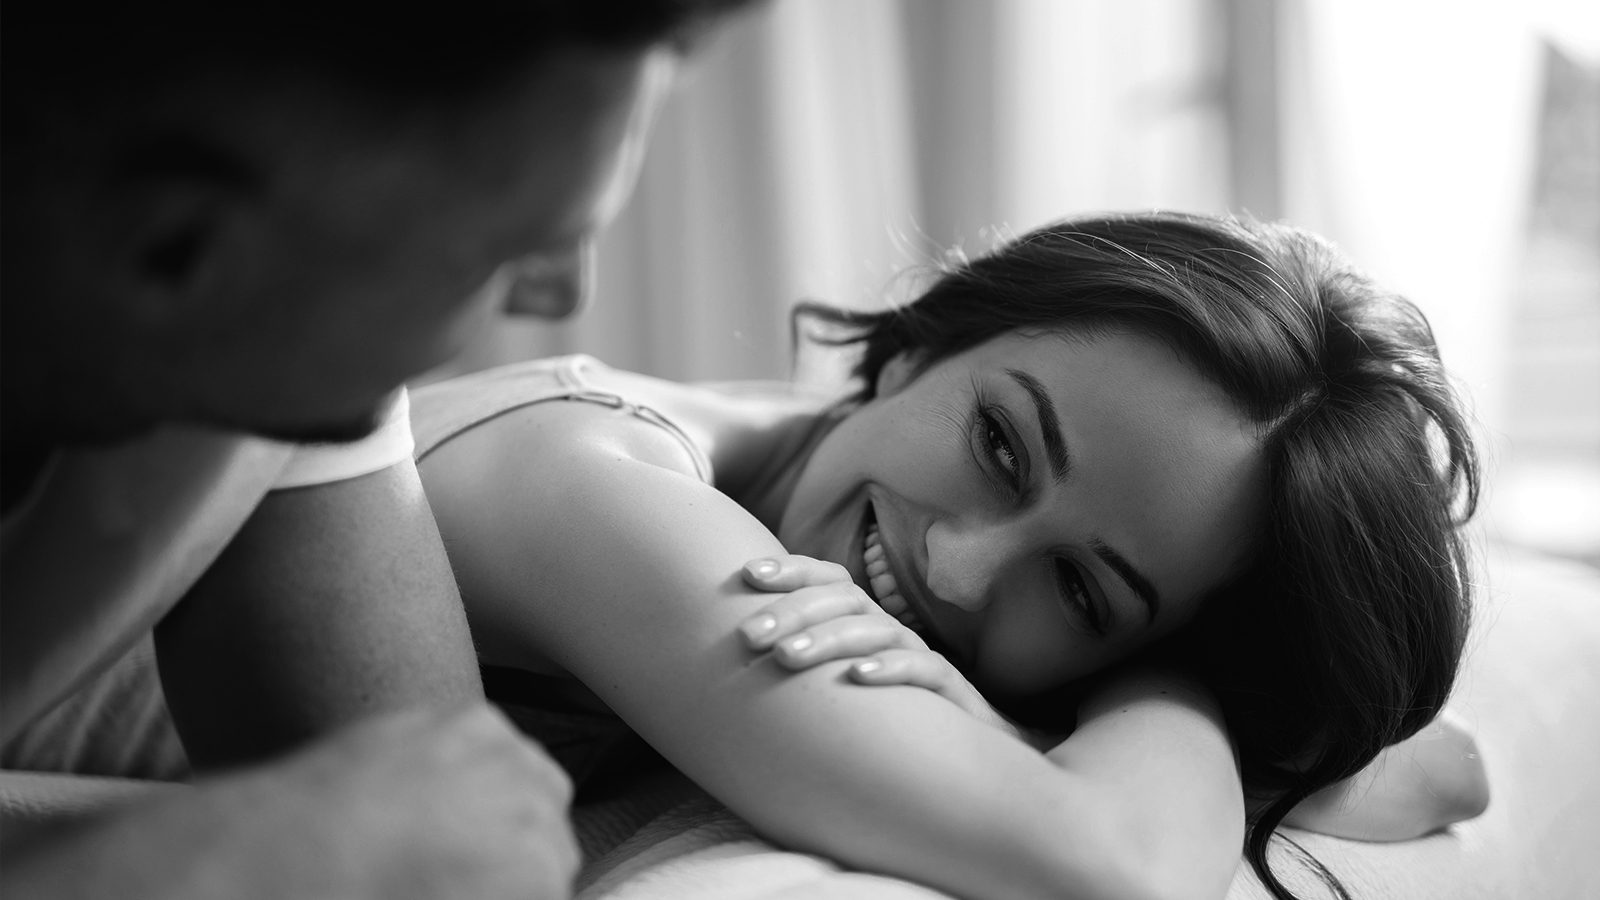 10 Ways an Honest Man Handles His Relationships Differently